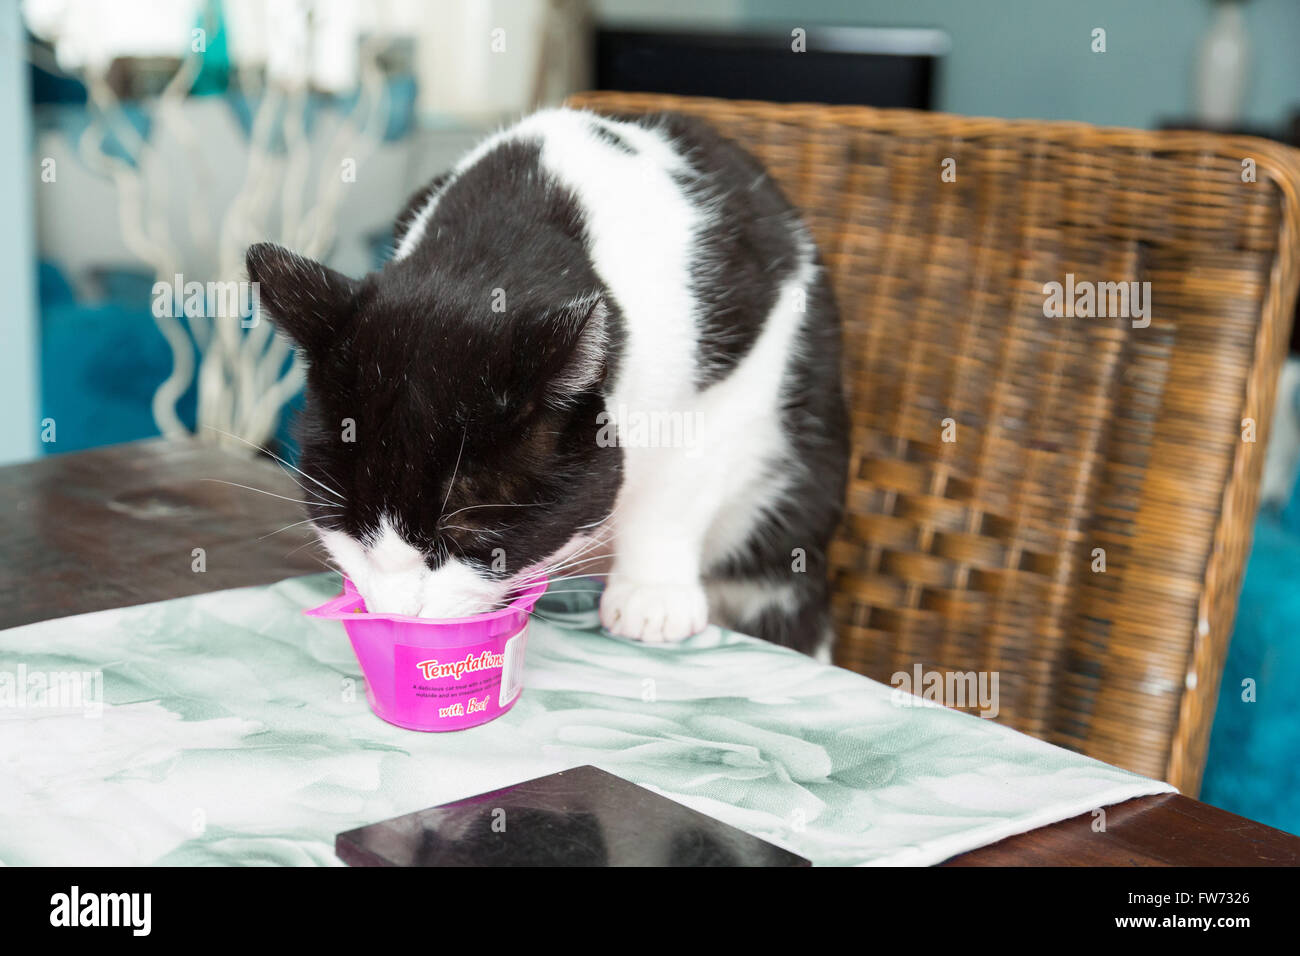 cat eating Whiskas Temptations snack meal at table in the UK Stock Photo